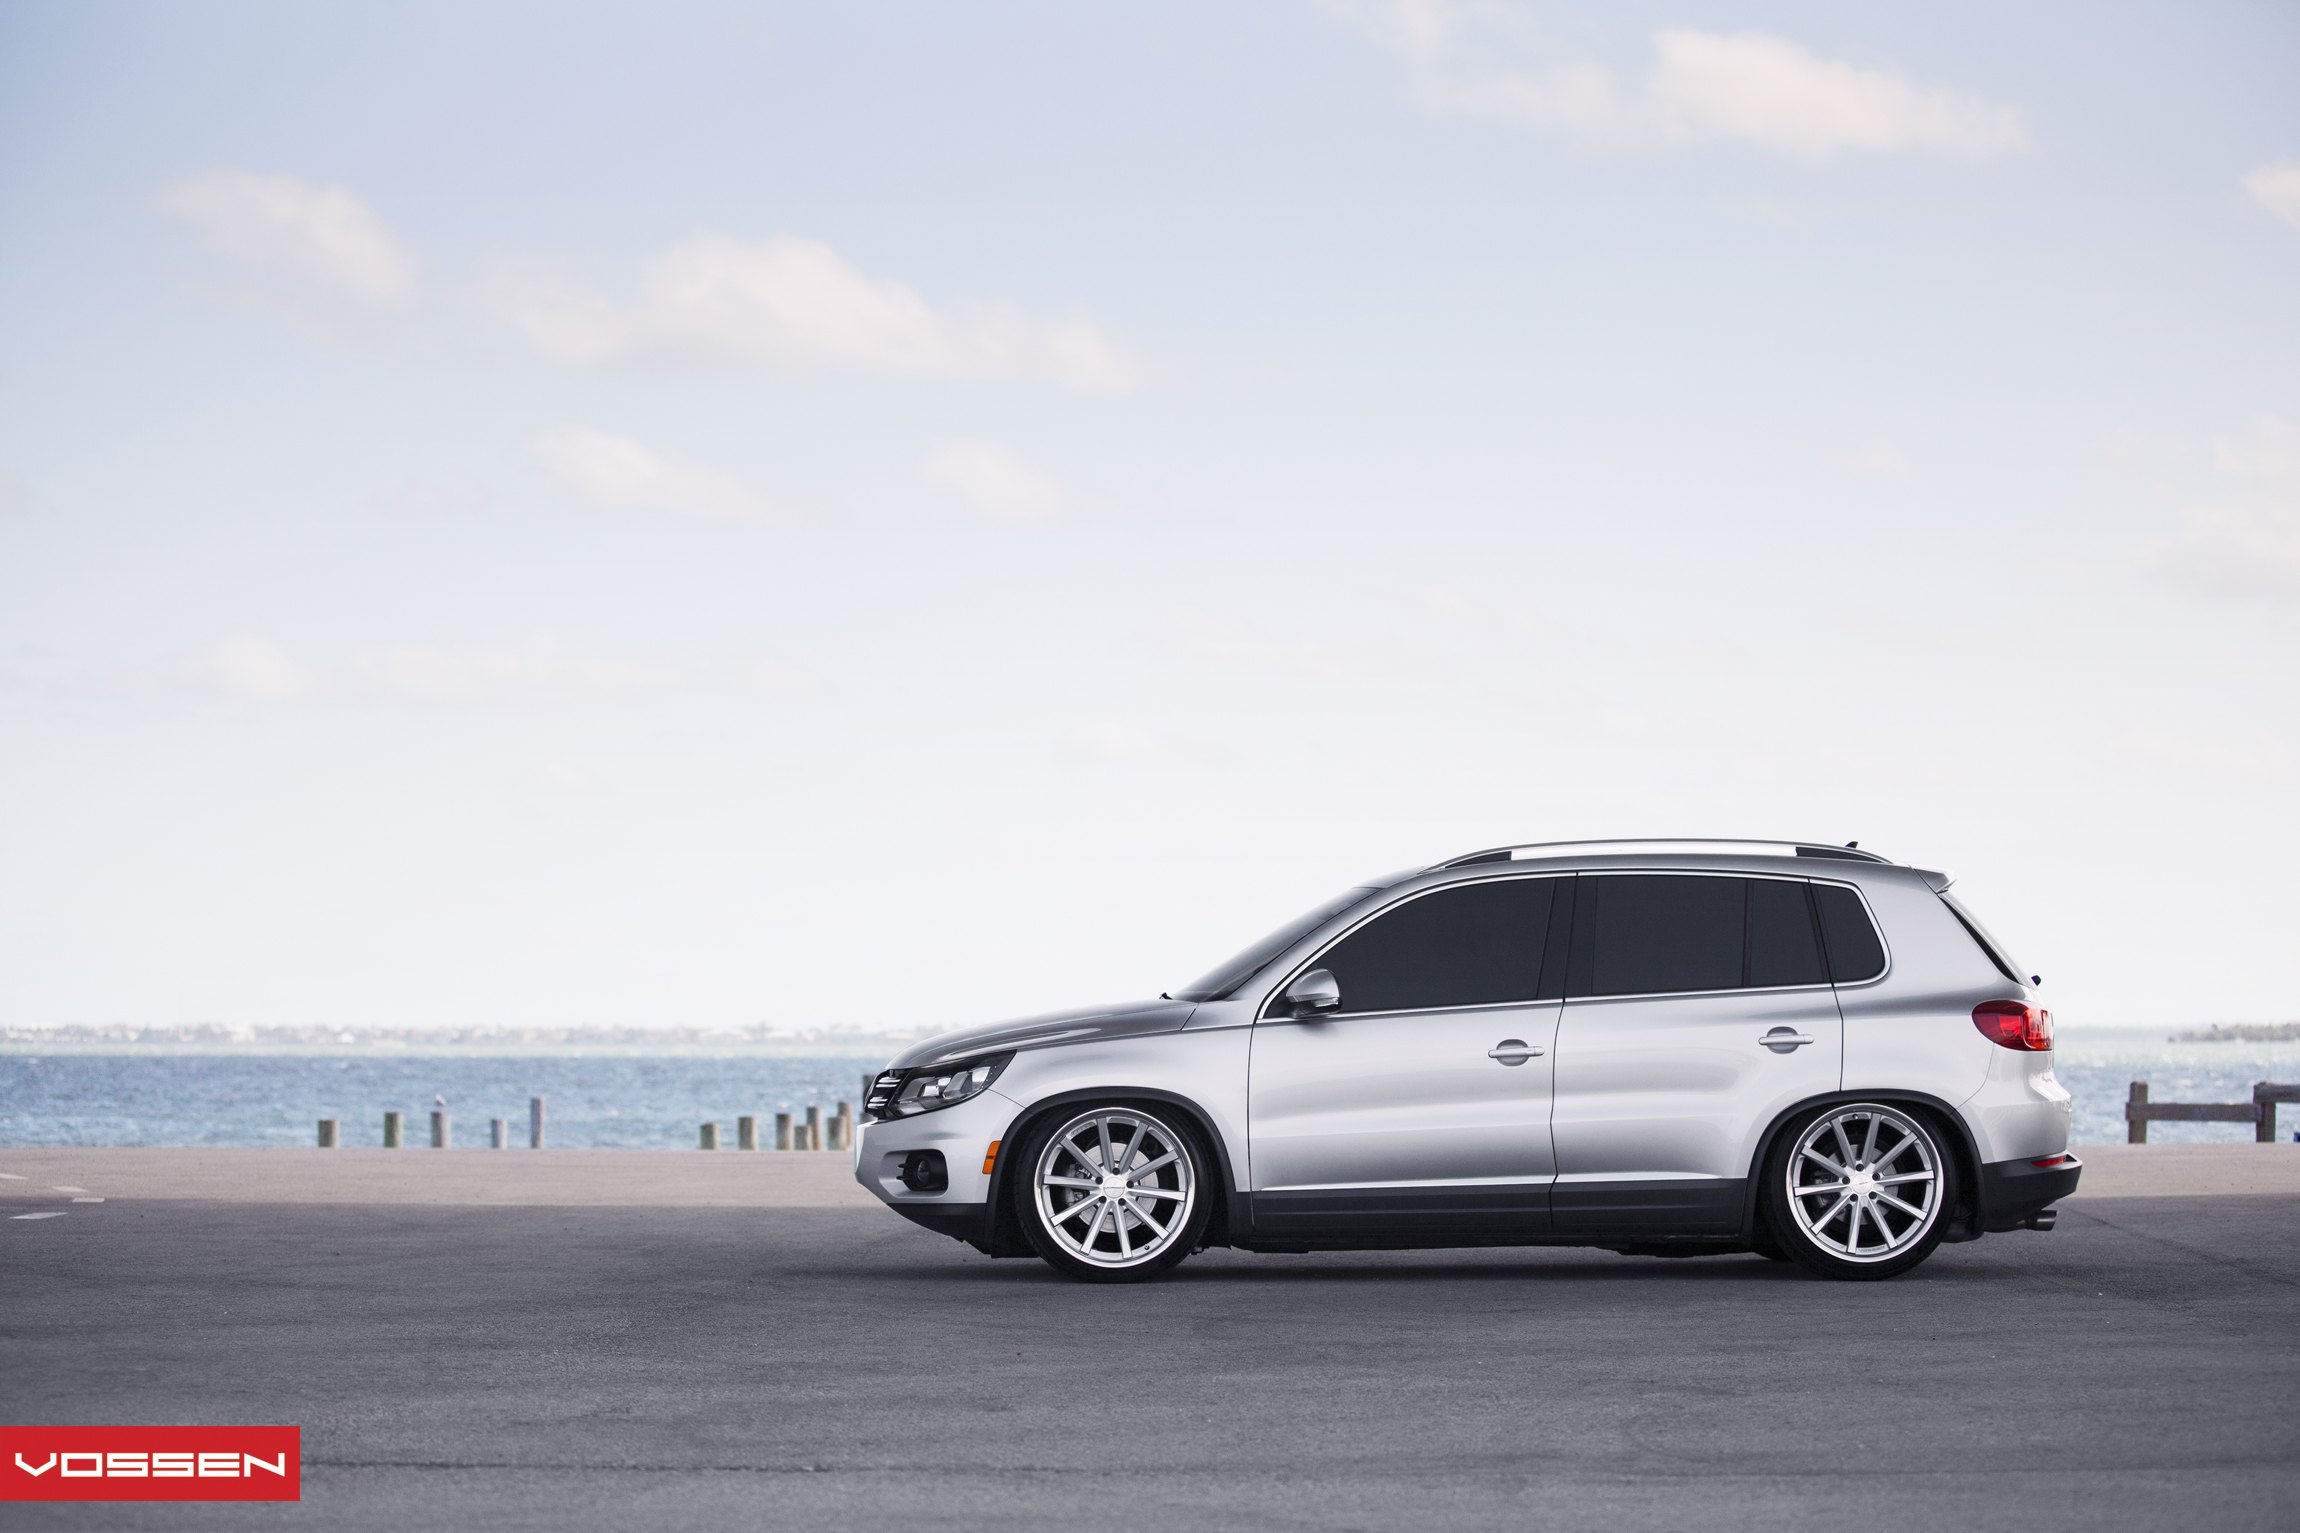 Black Side Skirts on Silver VW Tiguan - Photo by Vossen